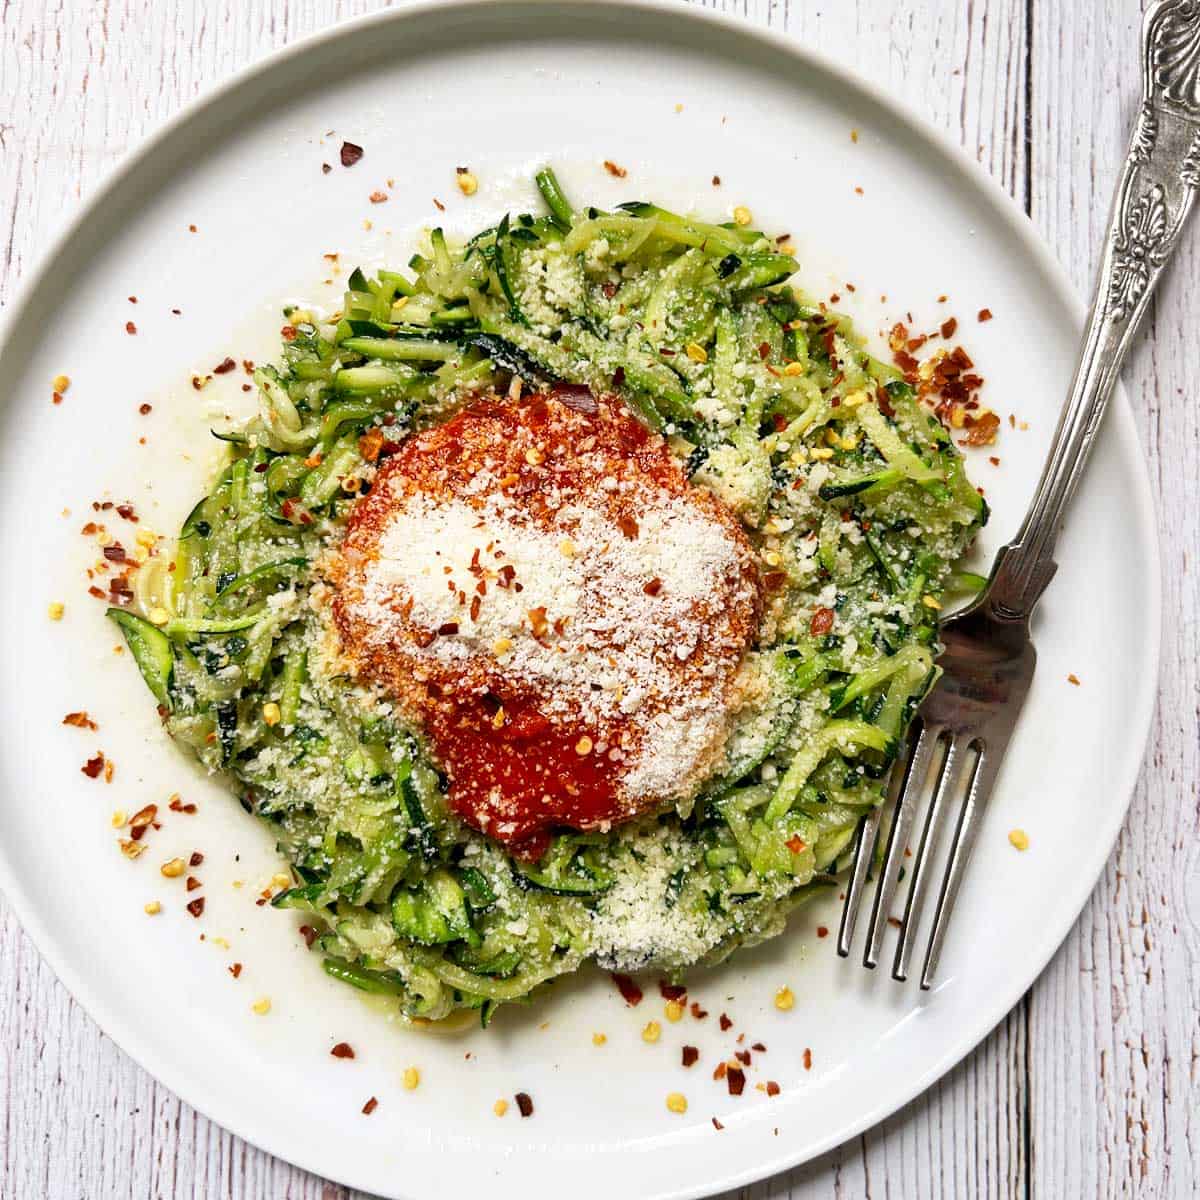 Zucchini noodles with marinara sauce and parmesan cheese.